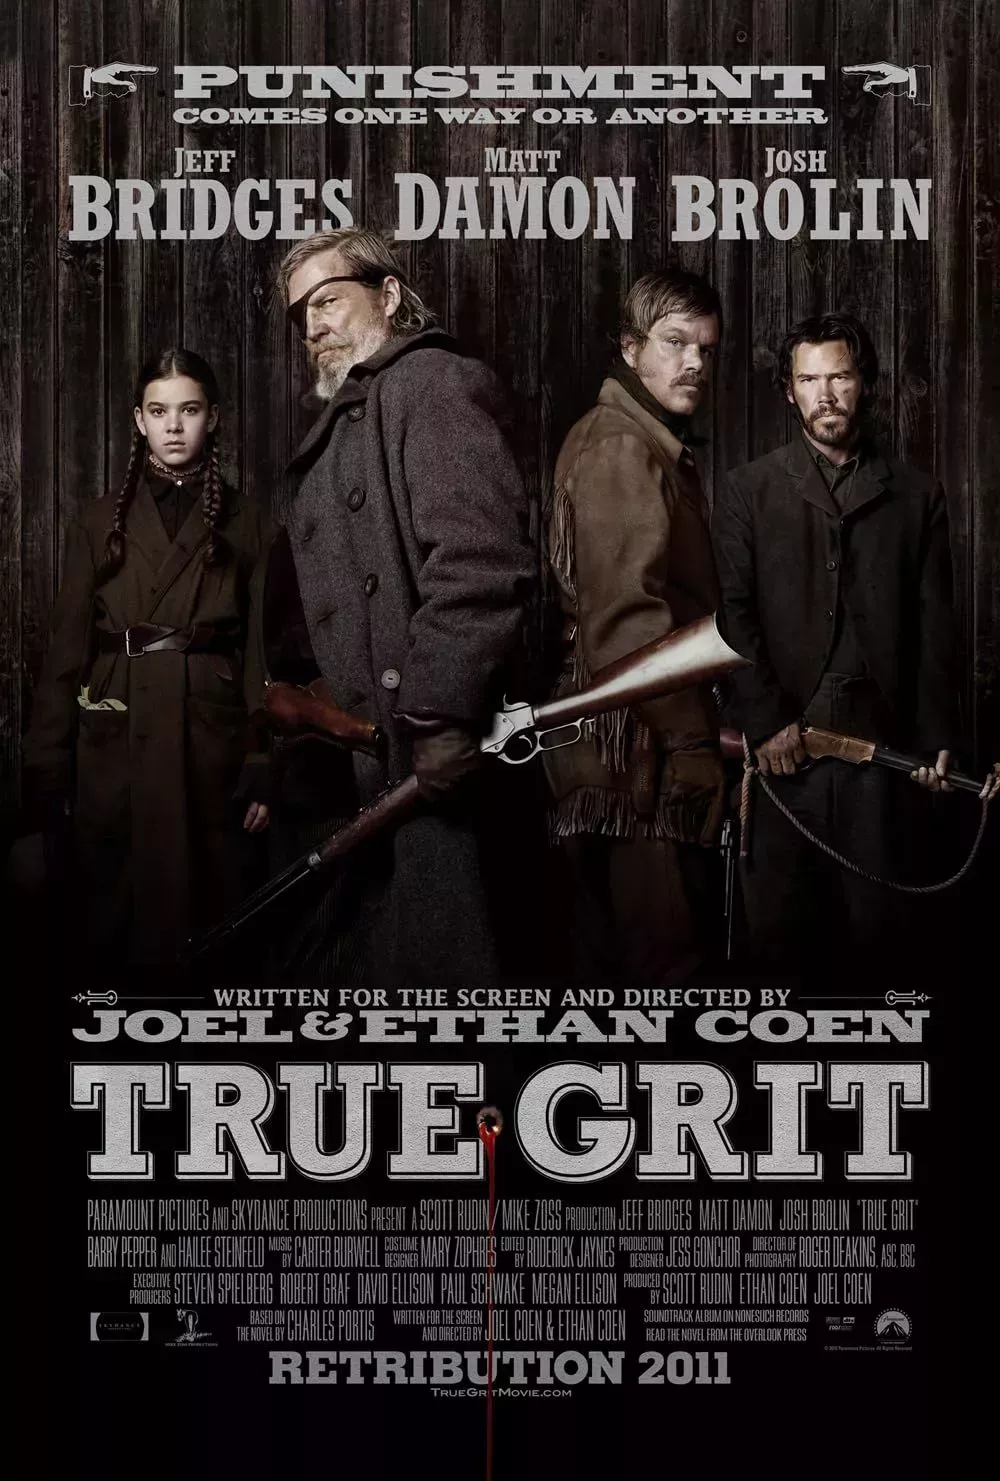 True Grit movie poster with the main cast standing together.